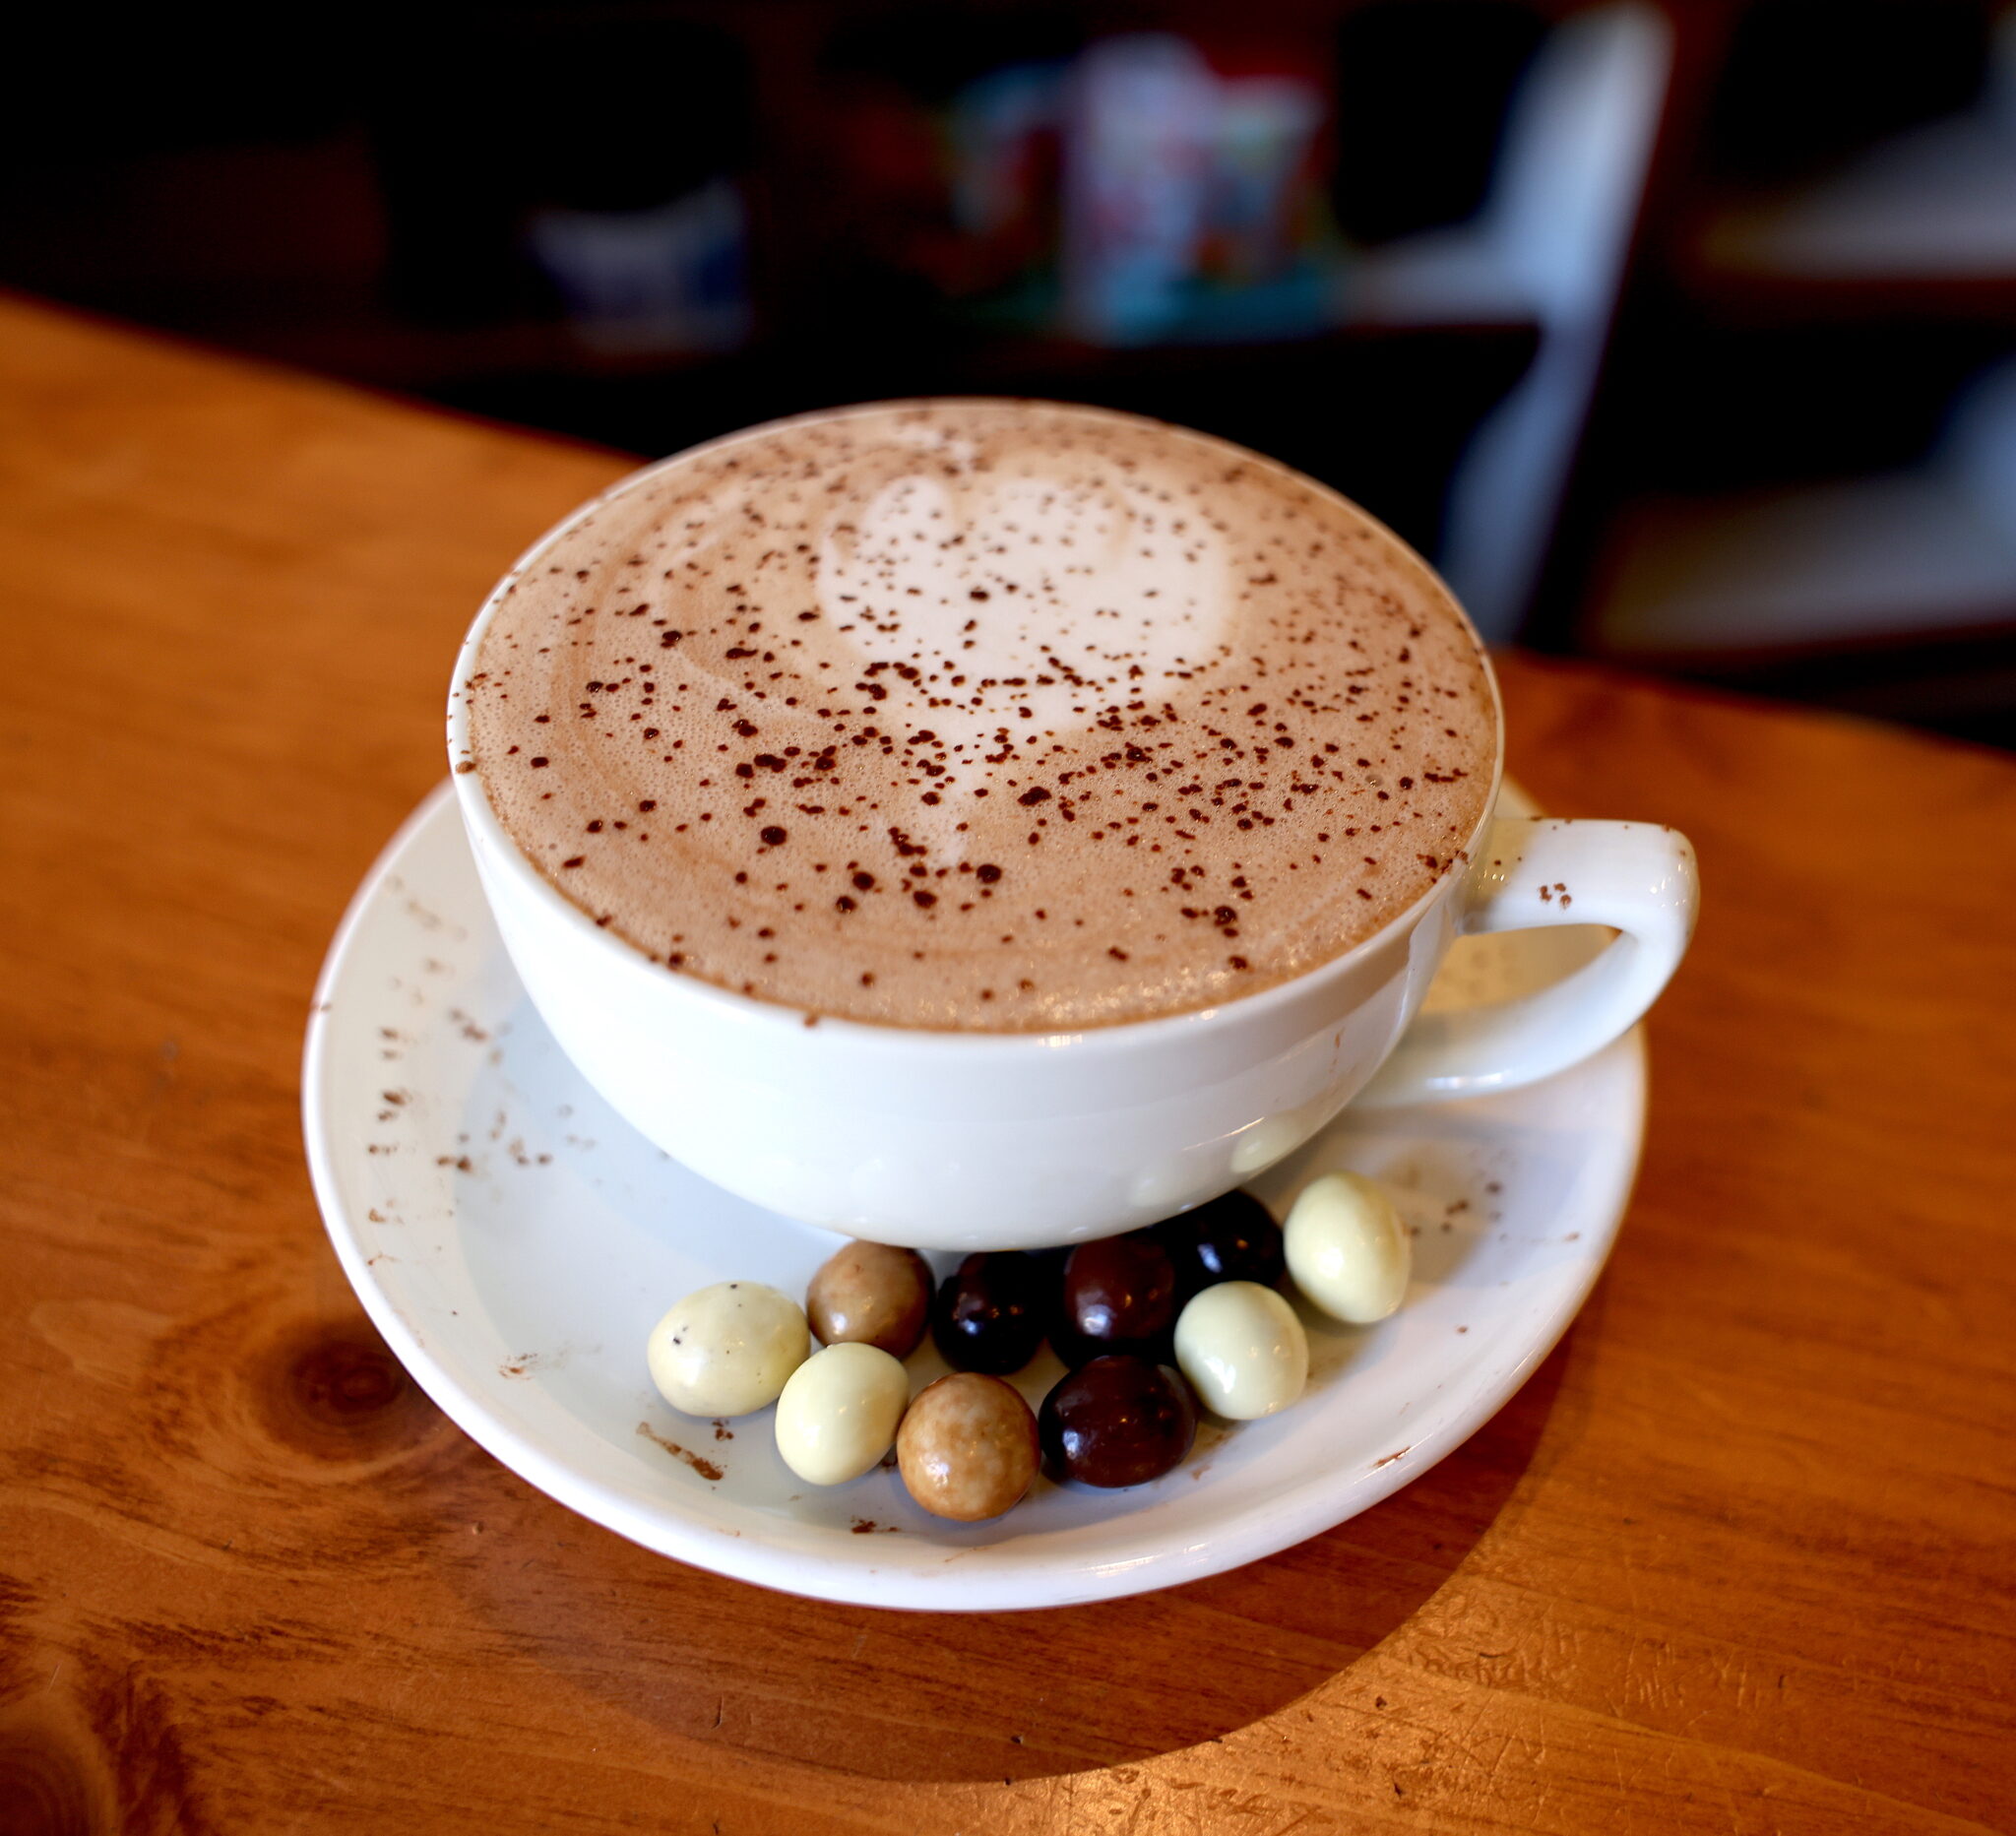 Where to find the most decadent hot chocolate in Birmingham